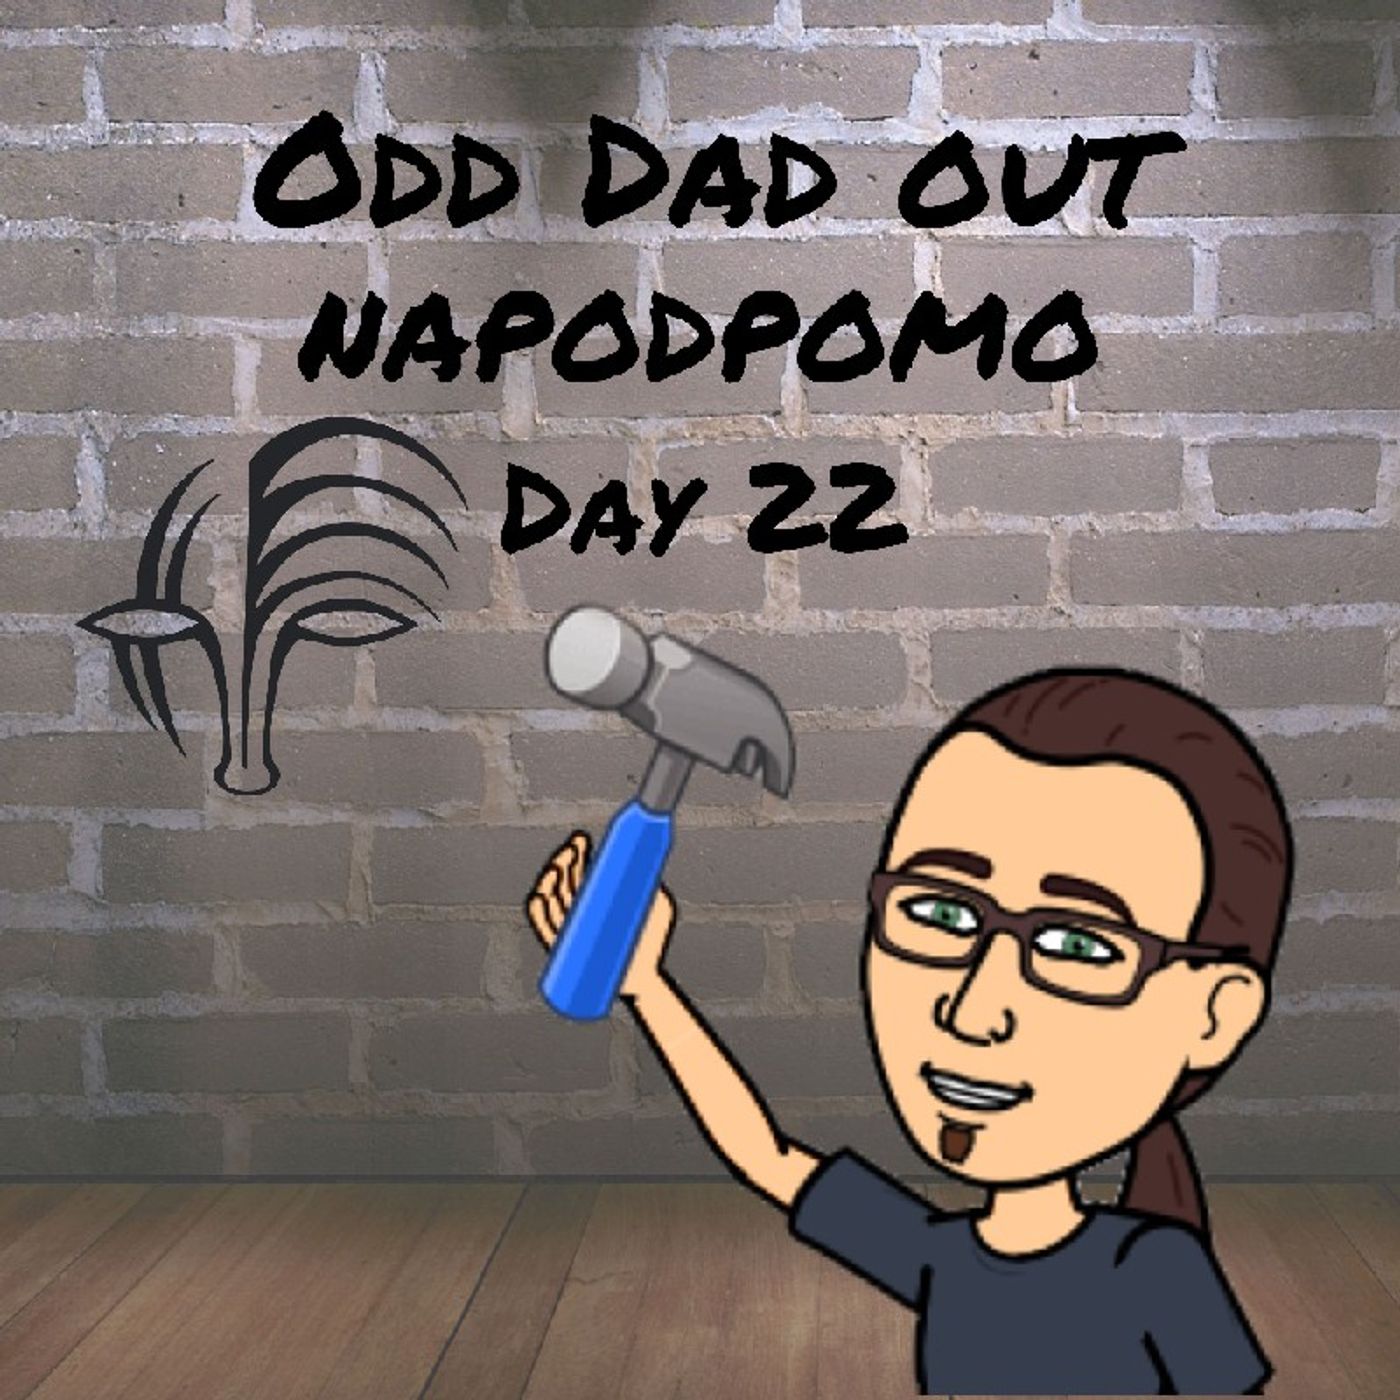 Unnecessarily Productive: NAPODPOMO Day 22